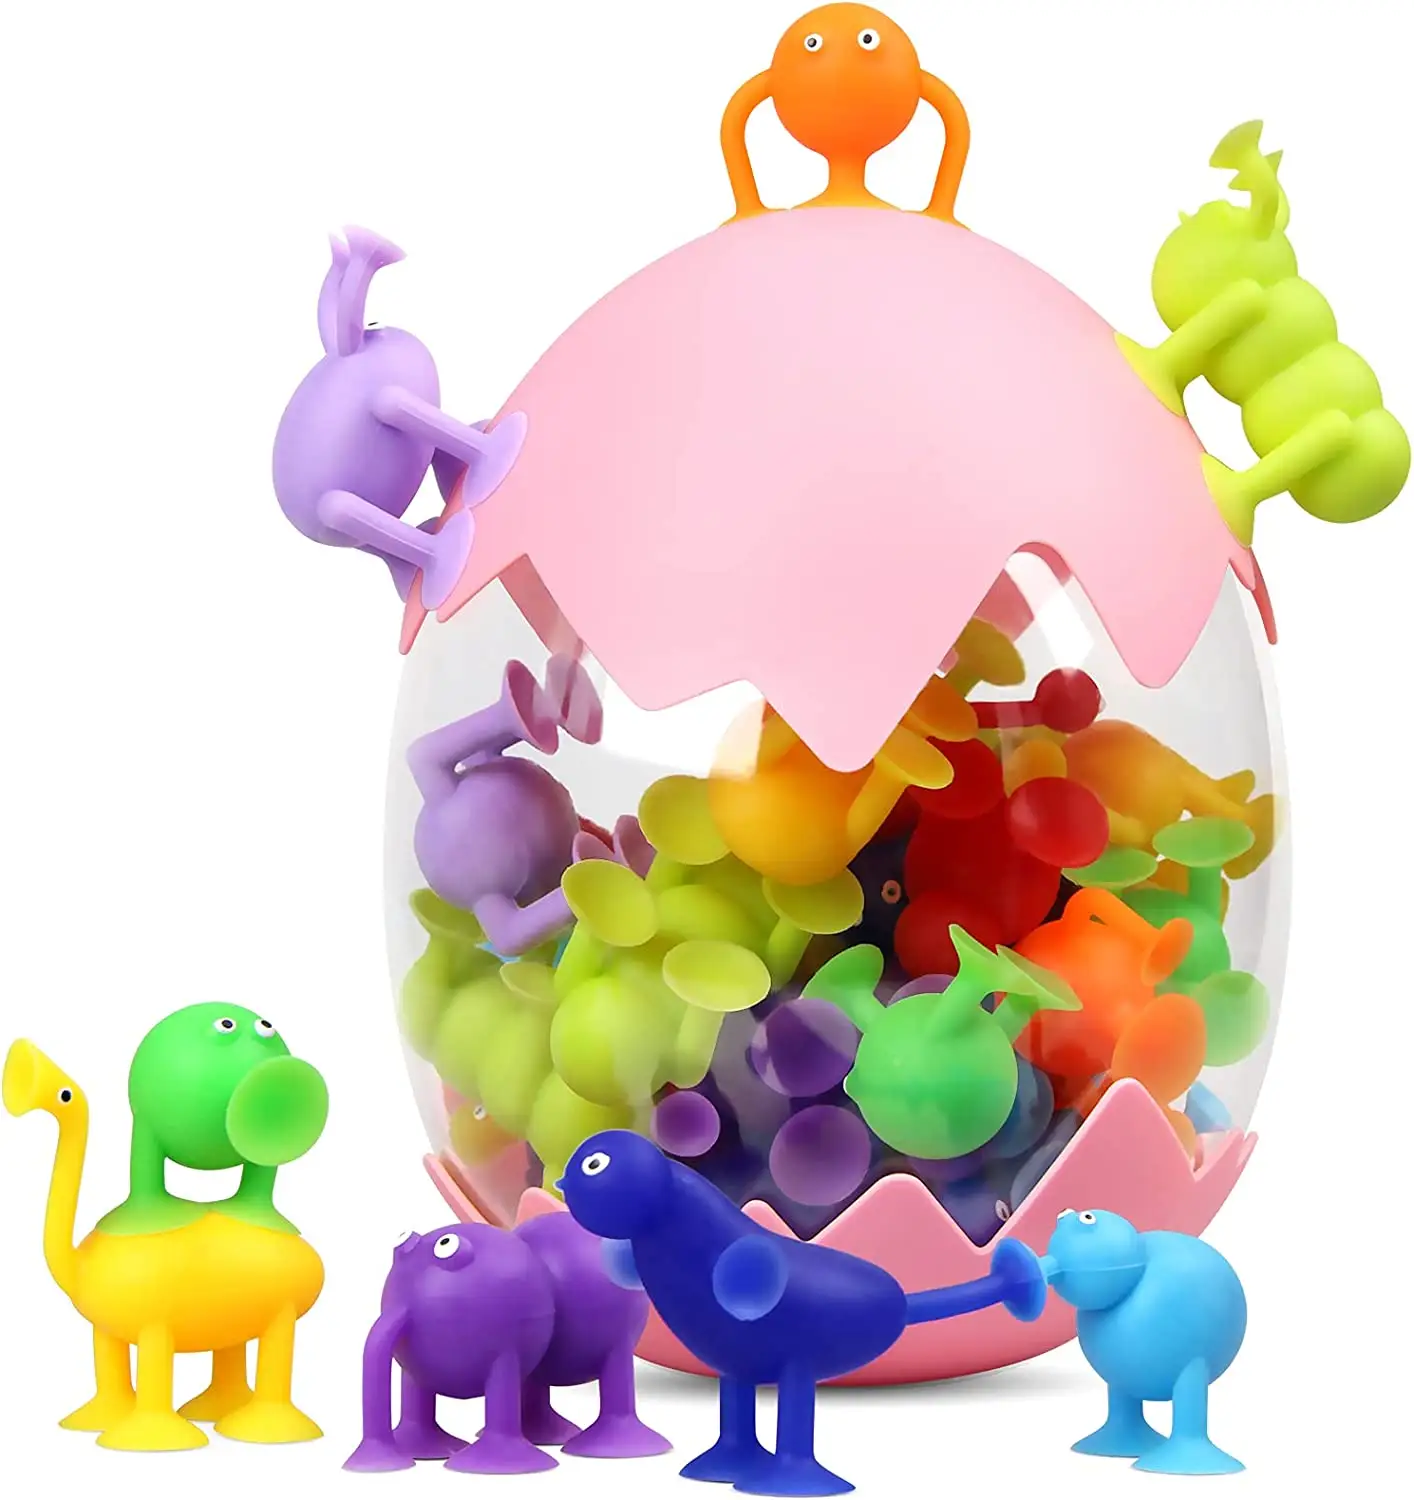 Suction Toys 36PCS Kids Suction Cup Toys Silicone Building Blocks with Eggshell Storage Suction Bath Toys for 3 +Year Old